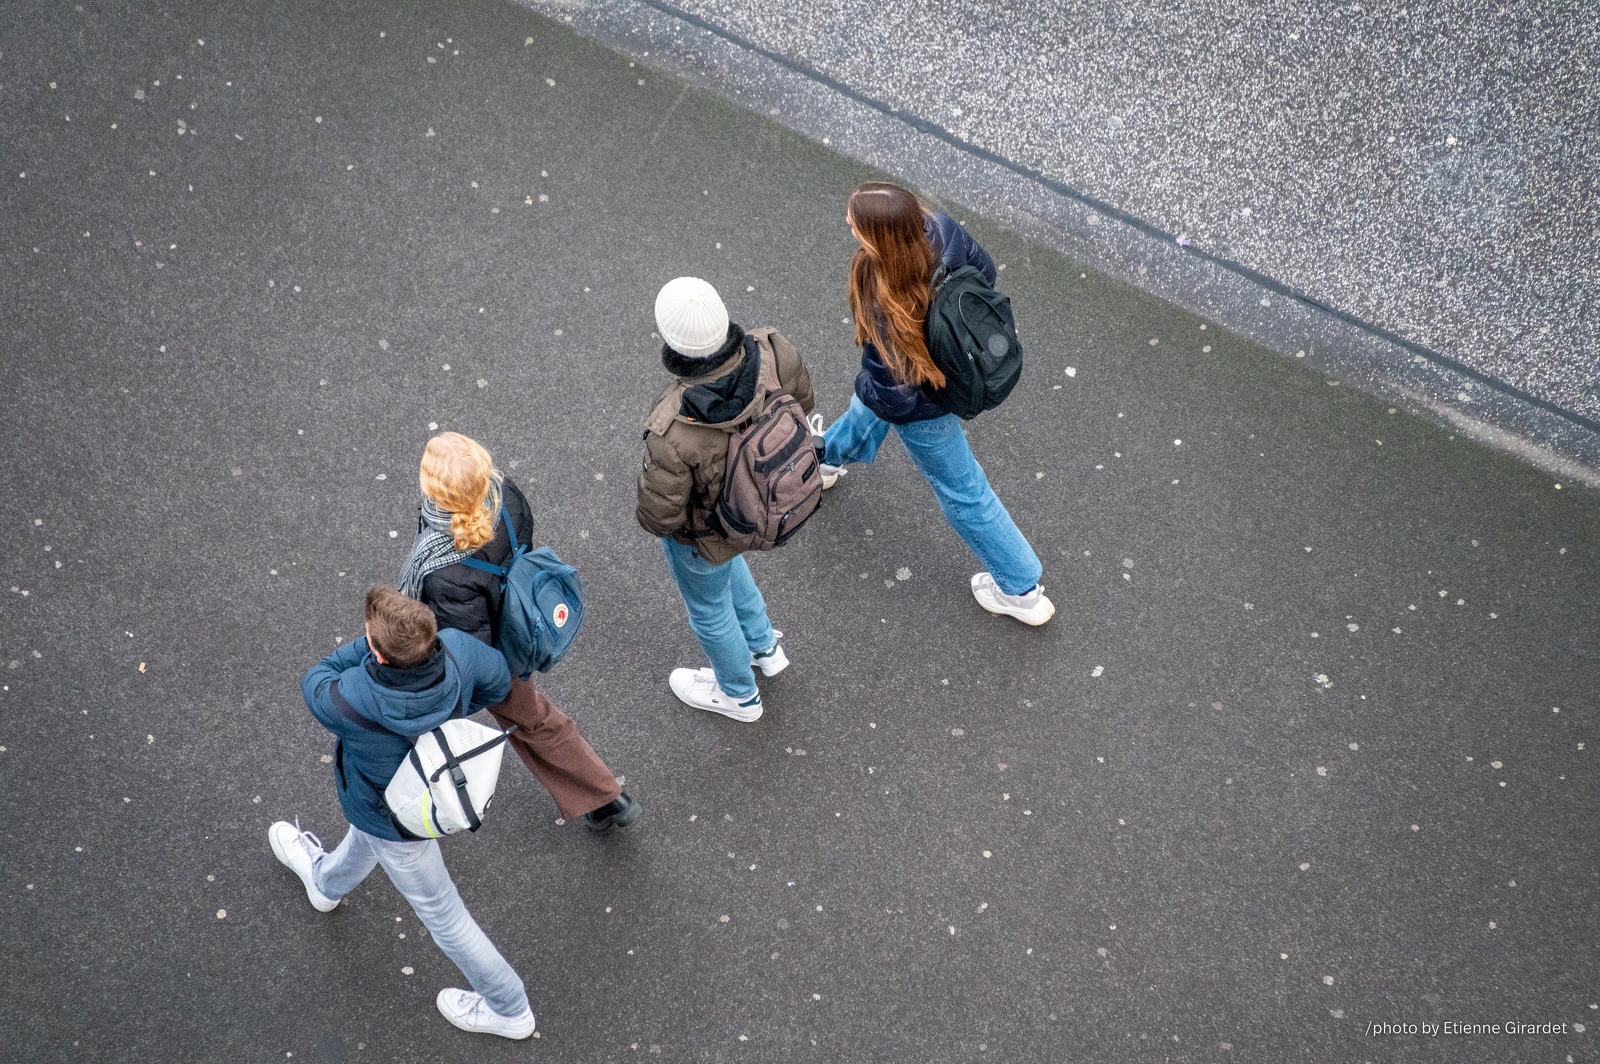 202201_31_ZZ6_9541-young-people-street-from-above-by-E-Girardet.jpg